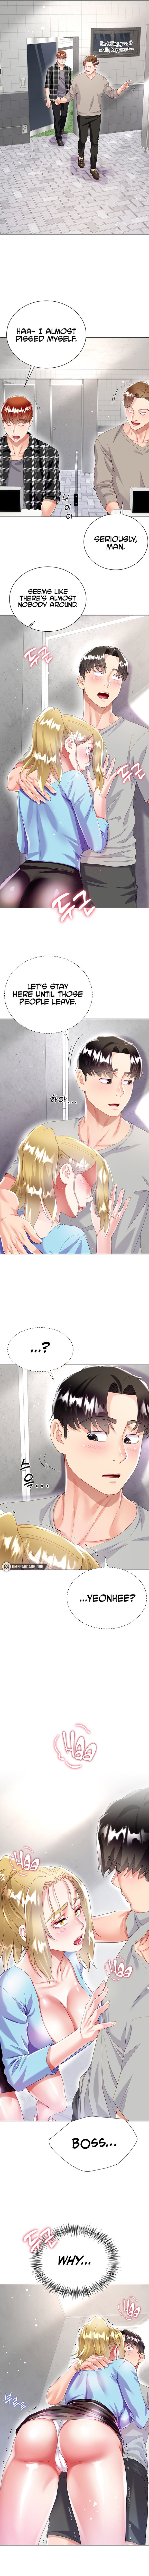 my-sister-in-laws-skirt-chap-33-10